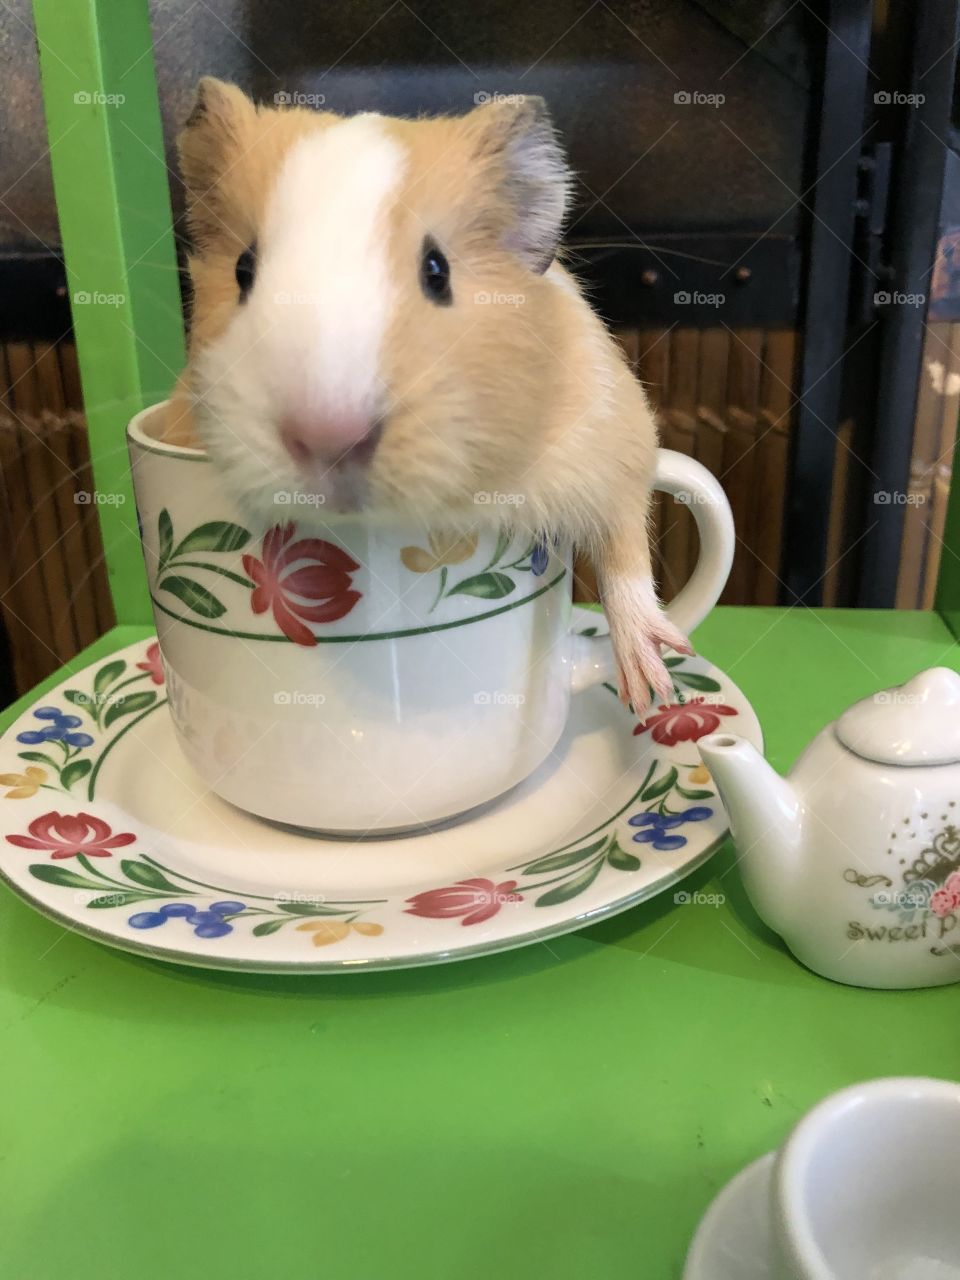 Care for a spot of tea?